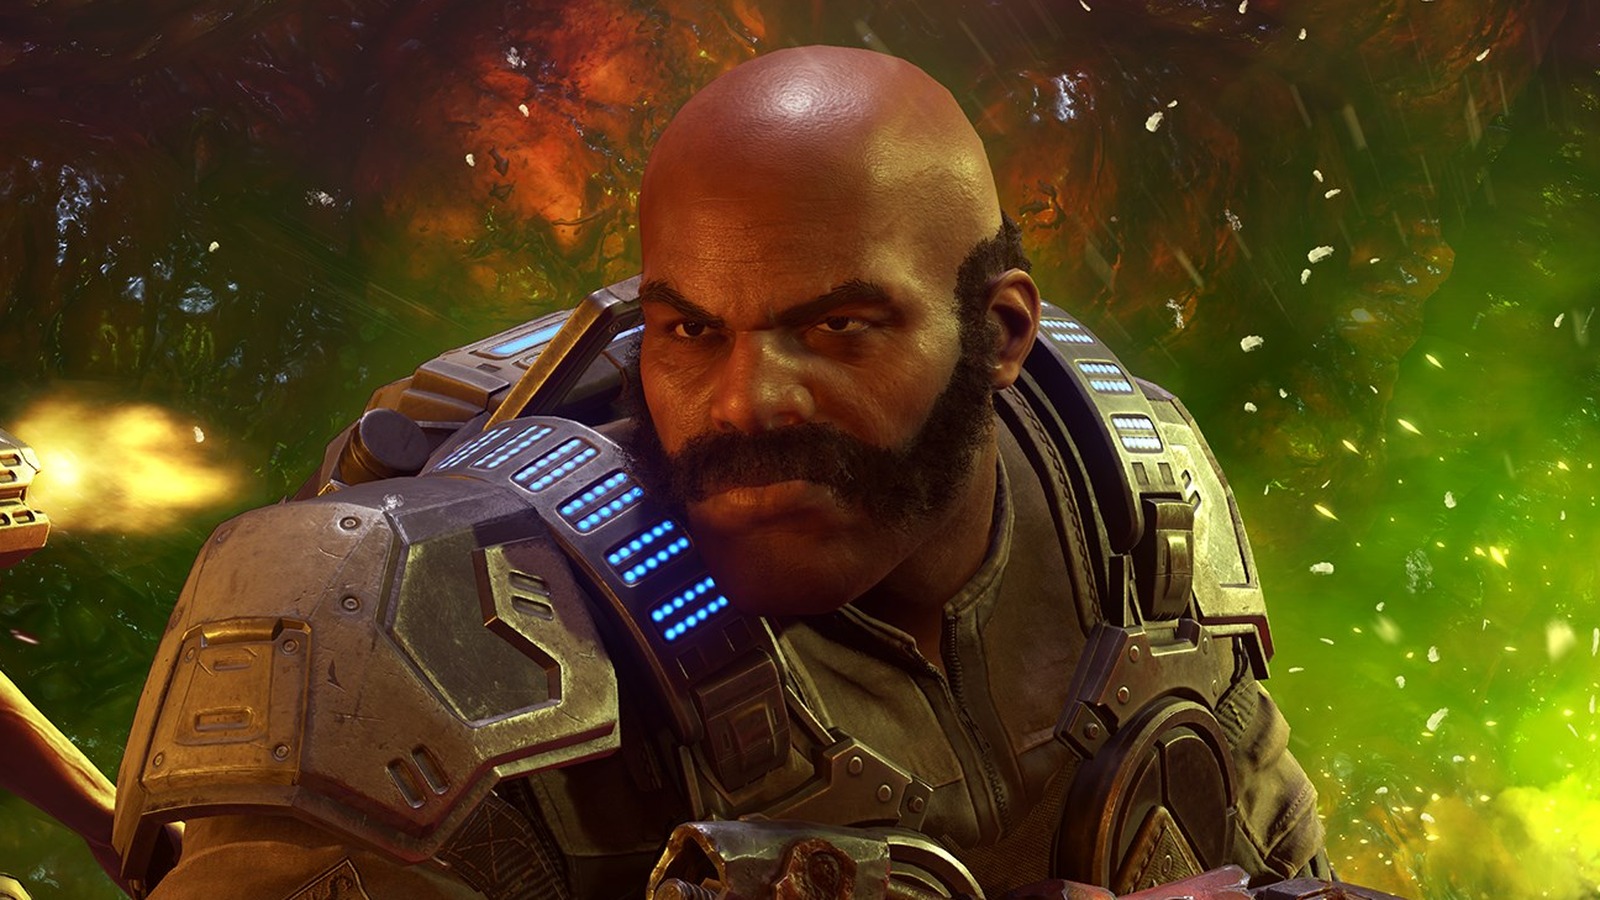 Gears 5 story DLC Hivebusters will see a new squad tell its story